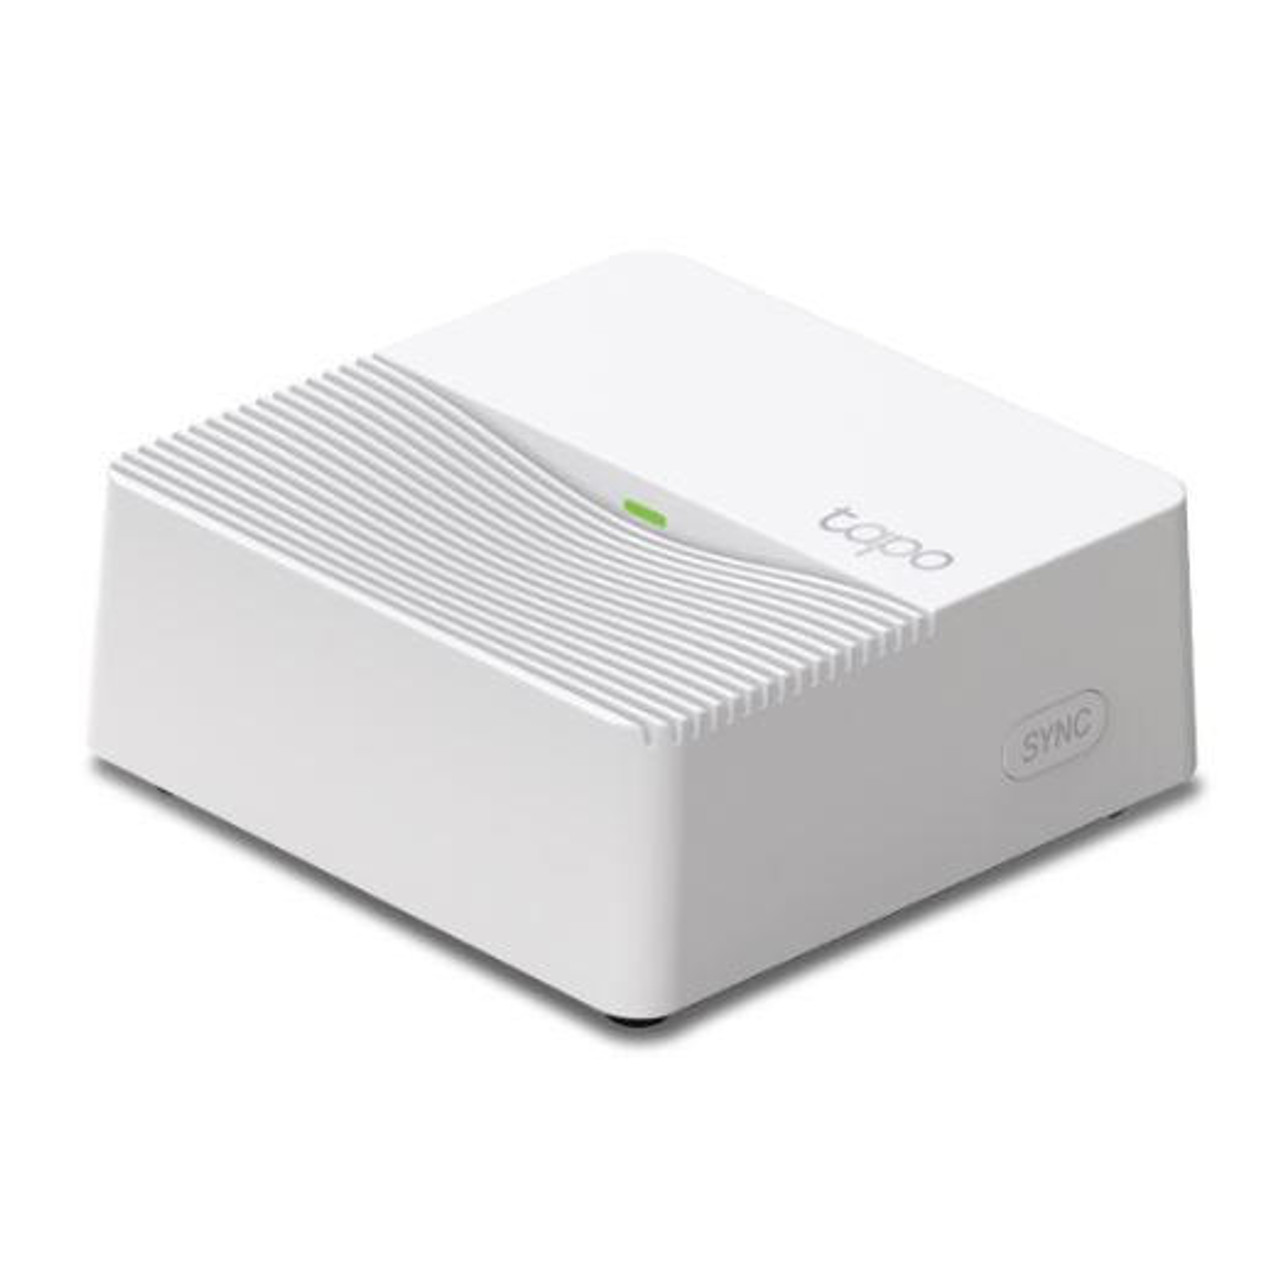 TP-Link Tapo Smart Iot Hub with Chime, Work with Tapo Smart Switch, Button  and Sensor, Connect Up to 64 Device, 19 Ringtone Options, No Wiring  Required (Tapo H100) Buy, Best Price in